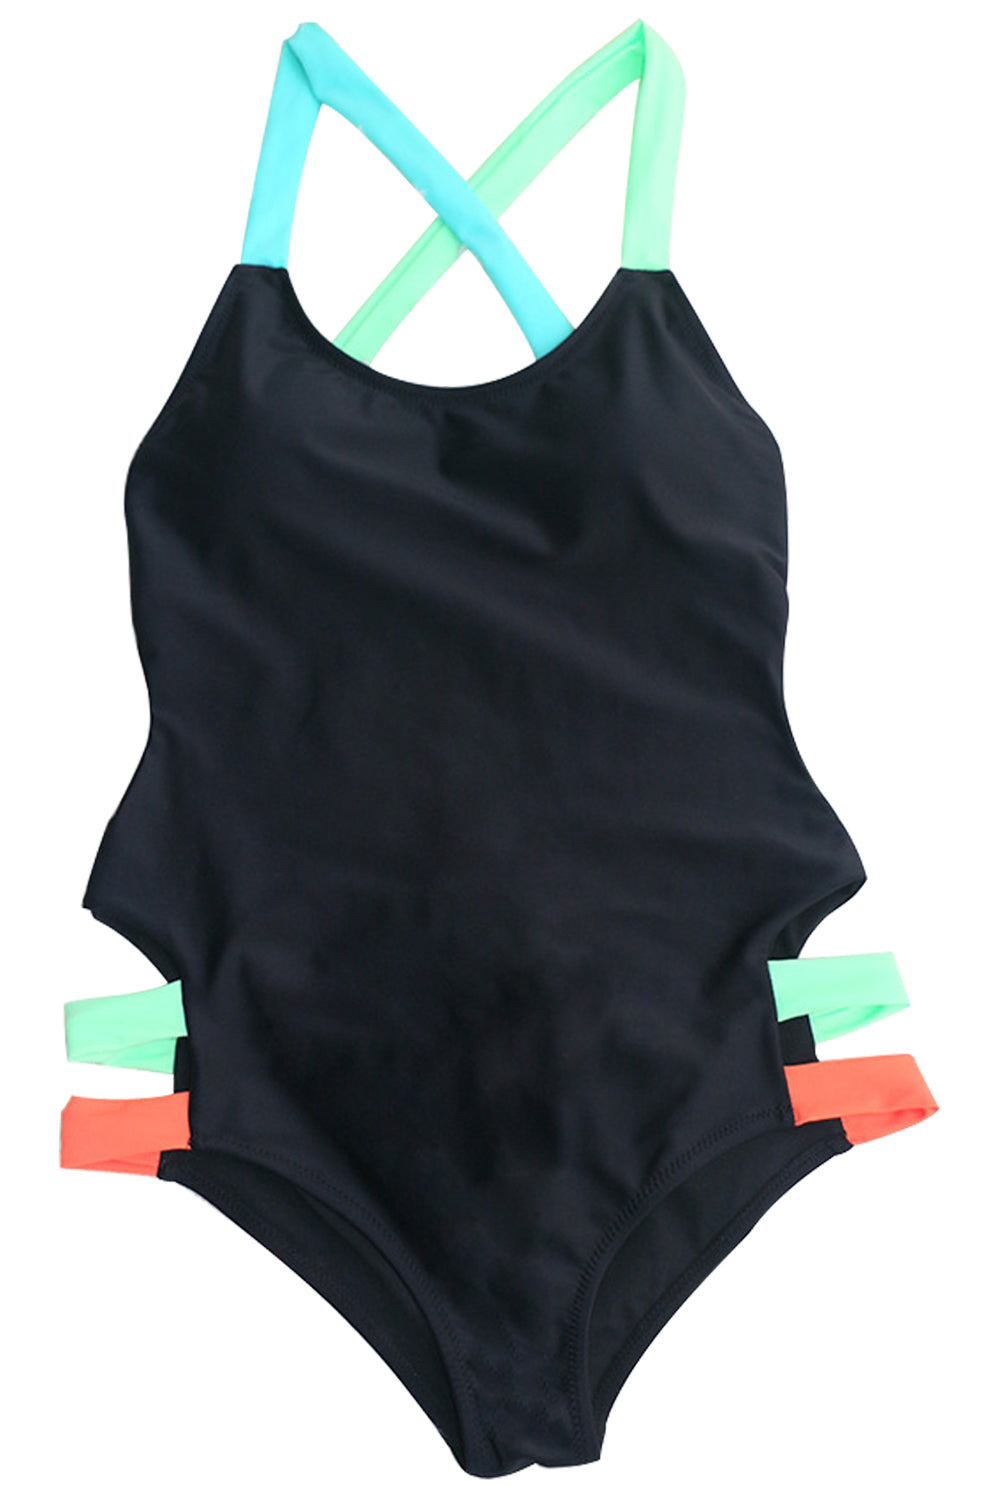 Iyasson Multi-colored Cross One-piece Swimsuit